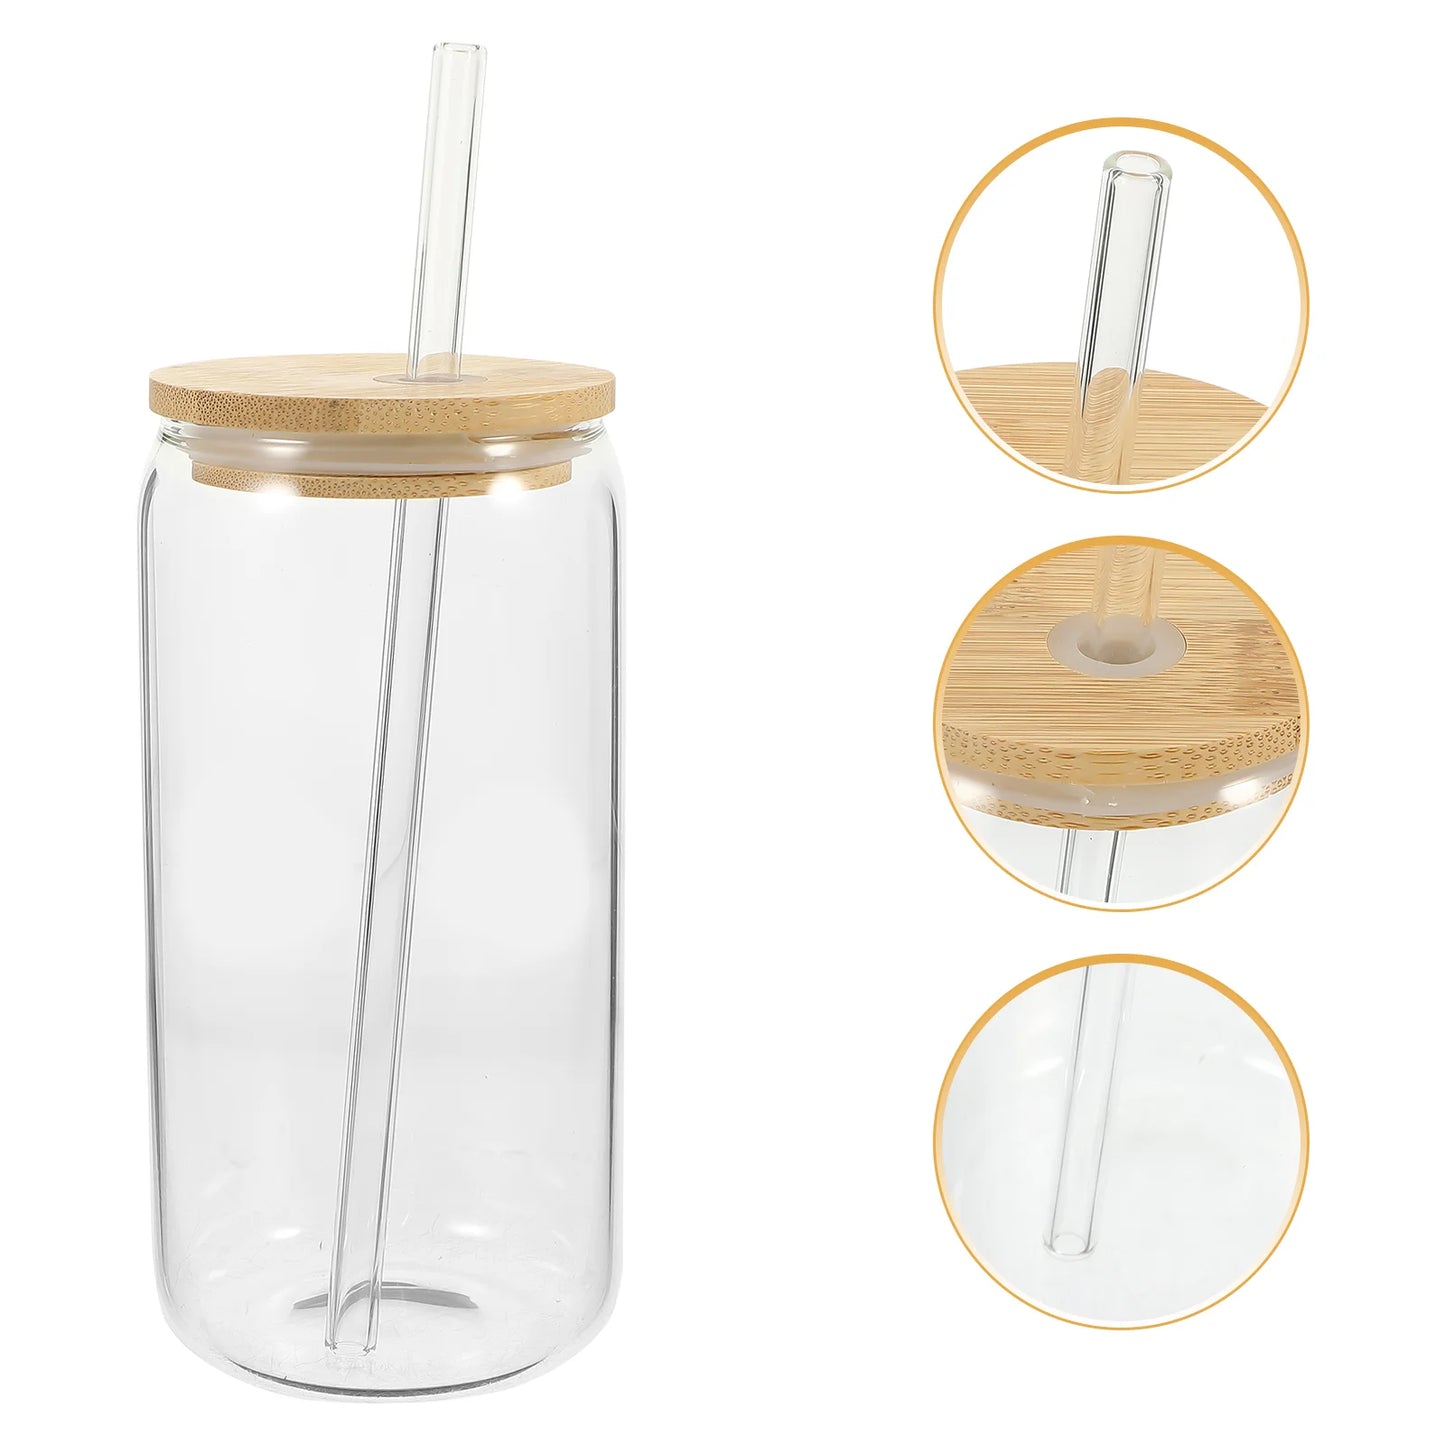 Bamboo Lid Drink Espresso Cup Coffee Glass with and Straw Drinking Glasses Lids Espresso Cups Straws Clear Tumblers